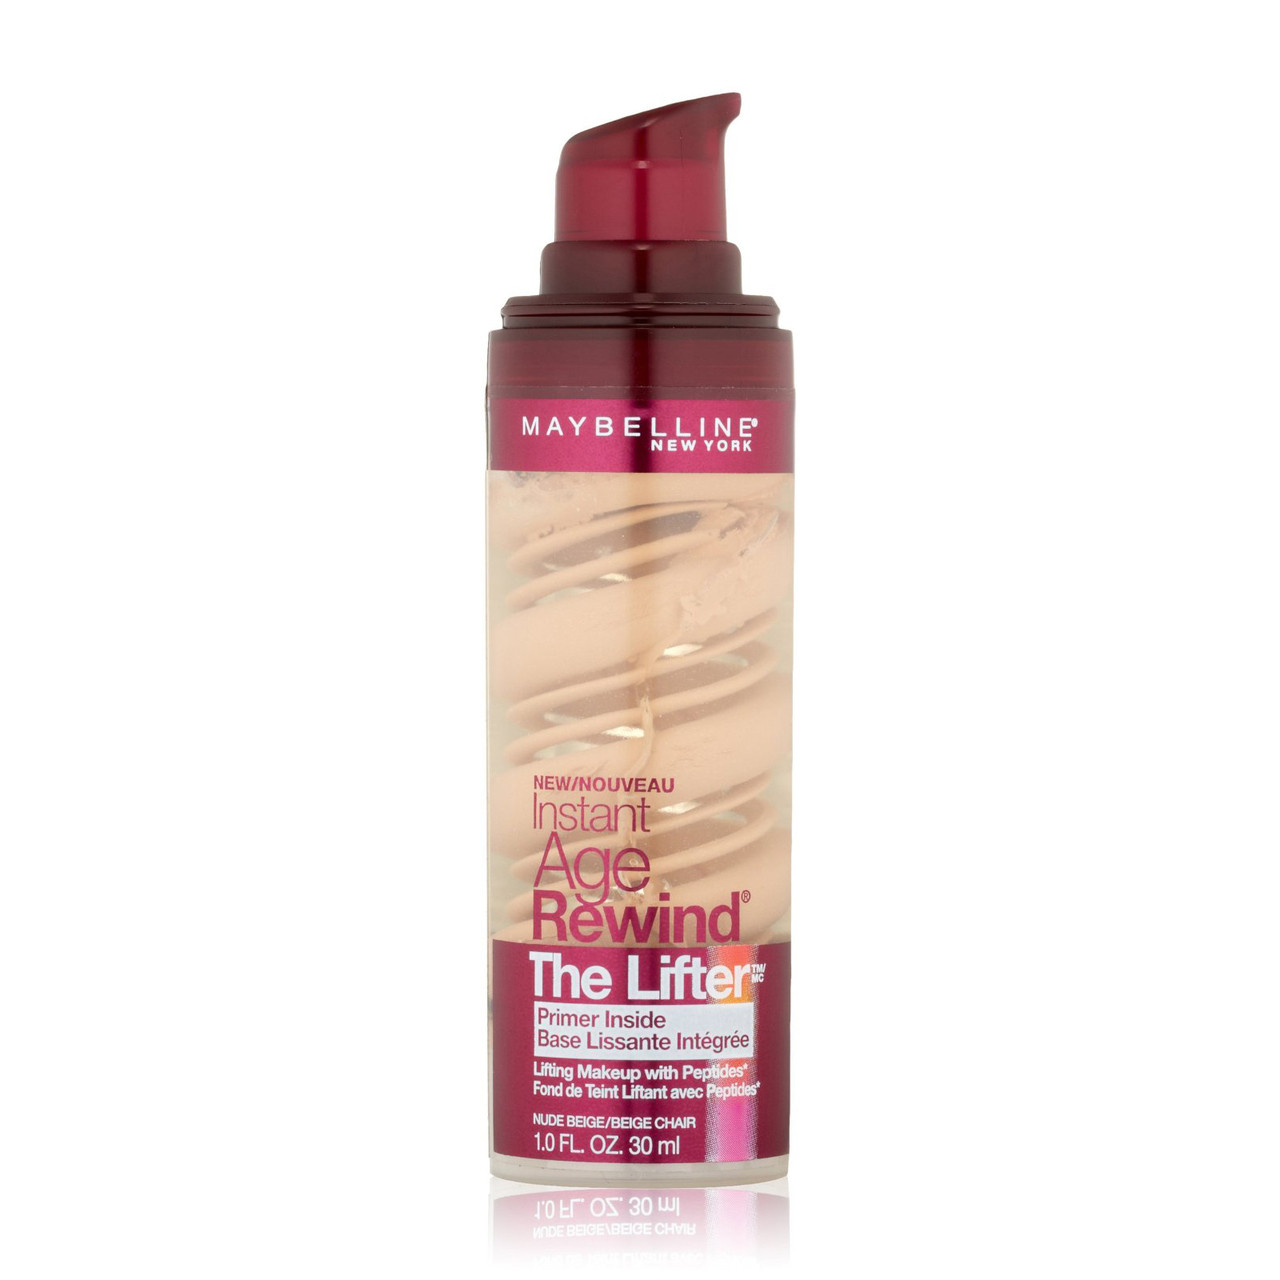 MAYBELLINE Instant Age Rewind The Lifter Makeup Foundation 